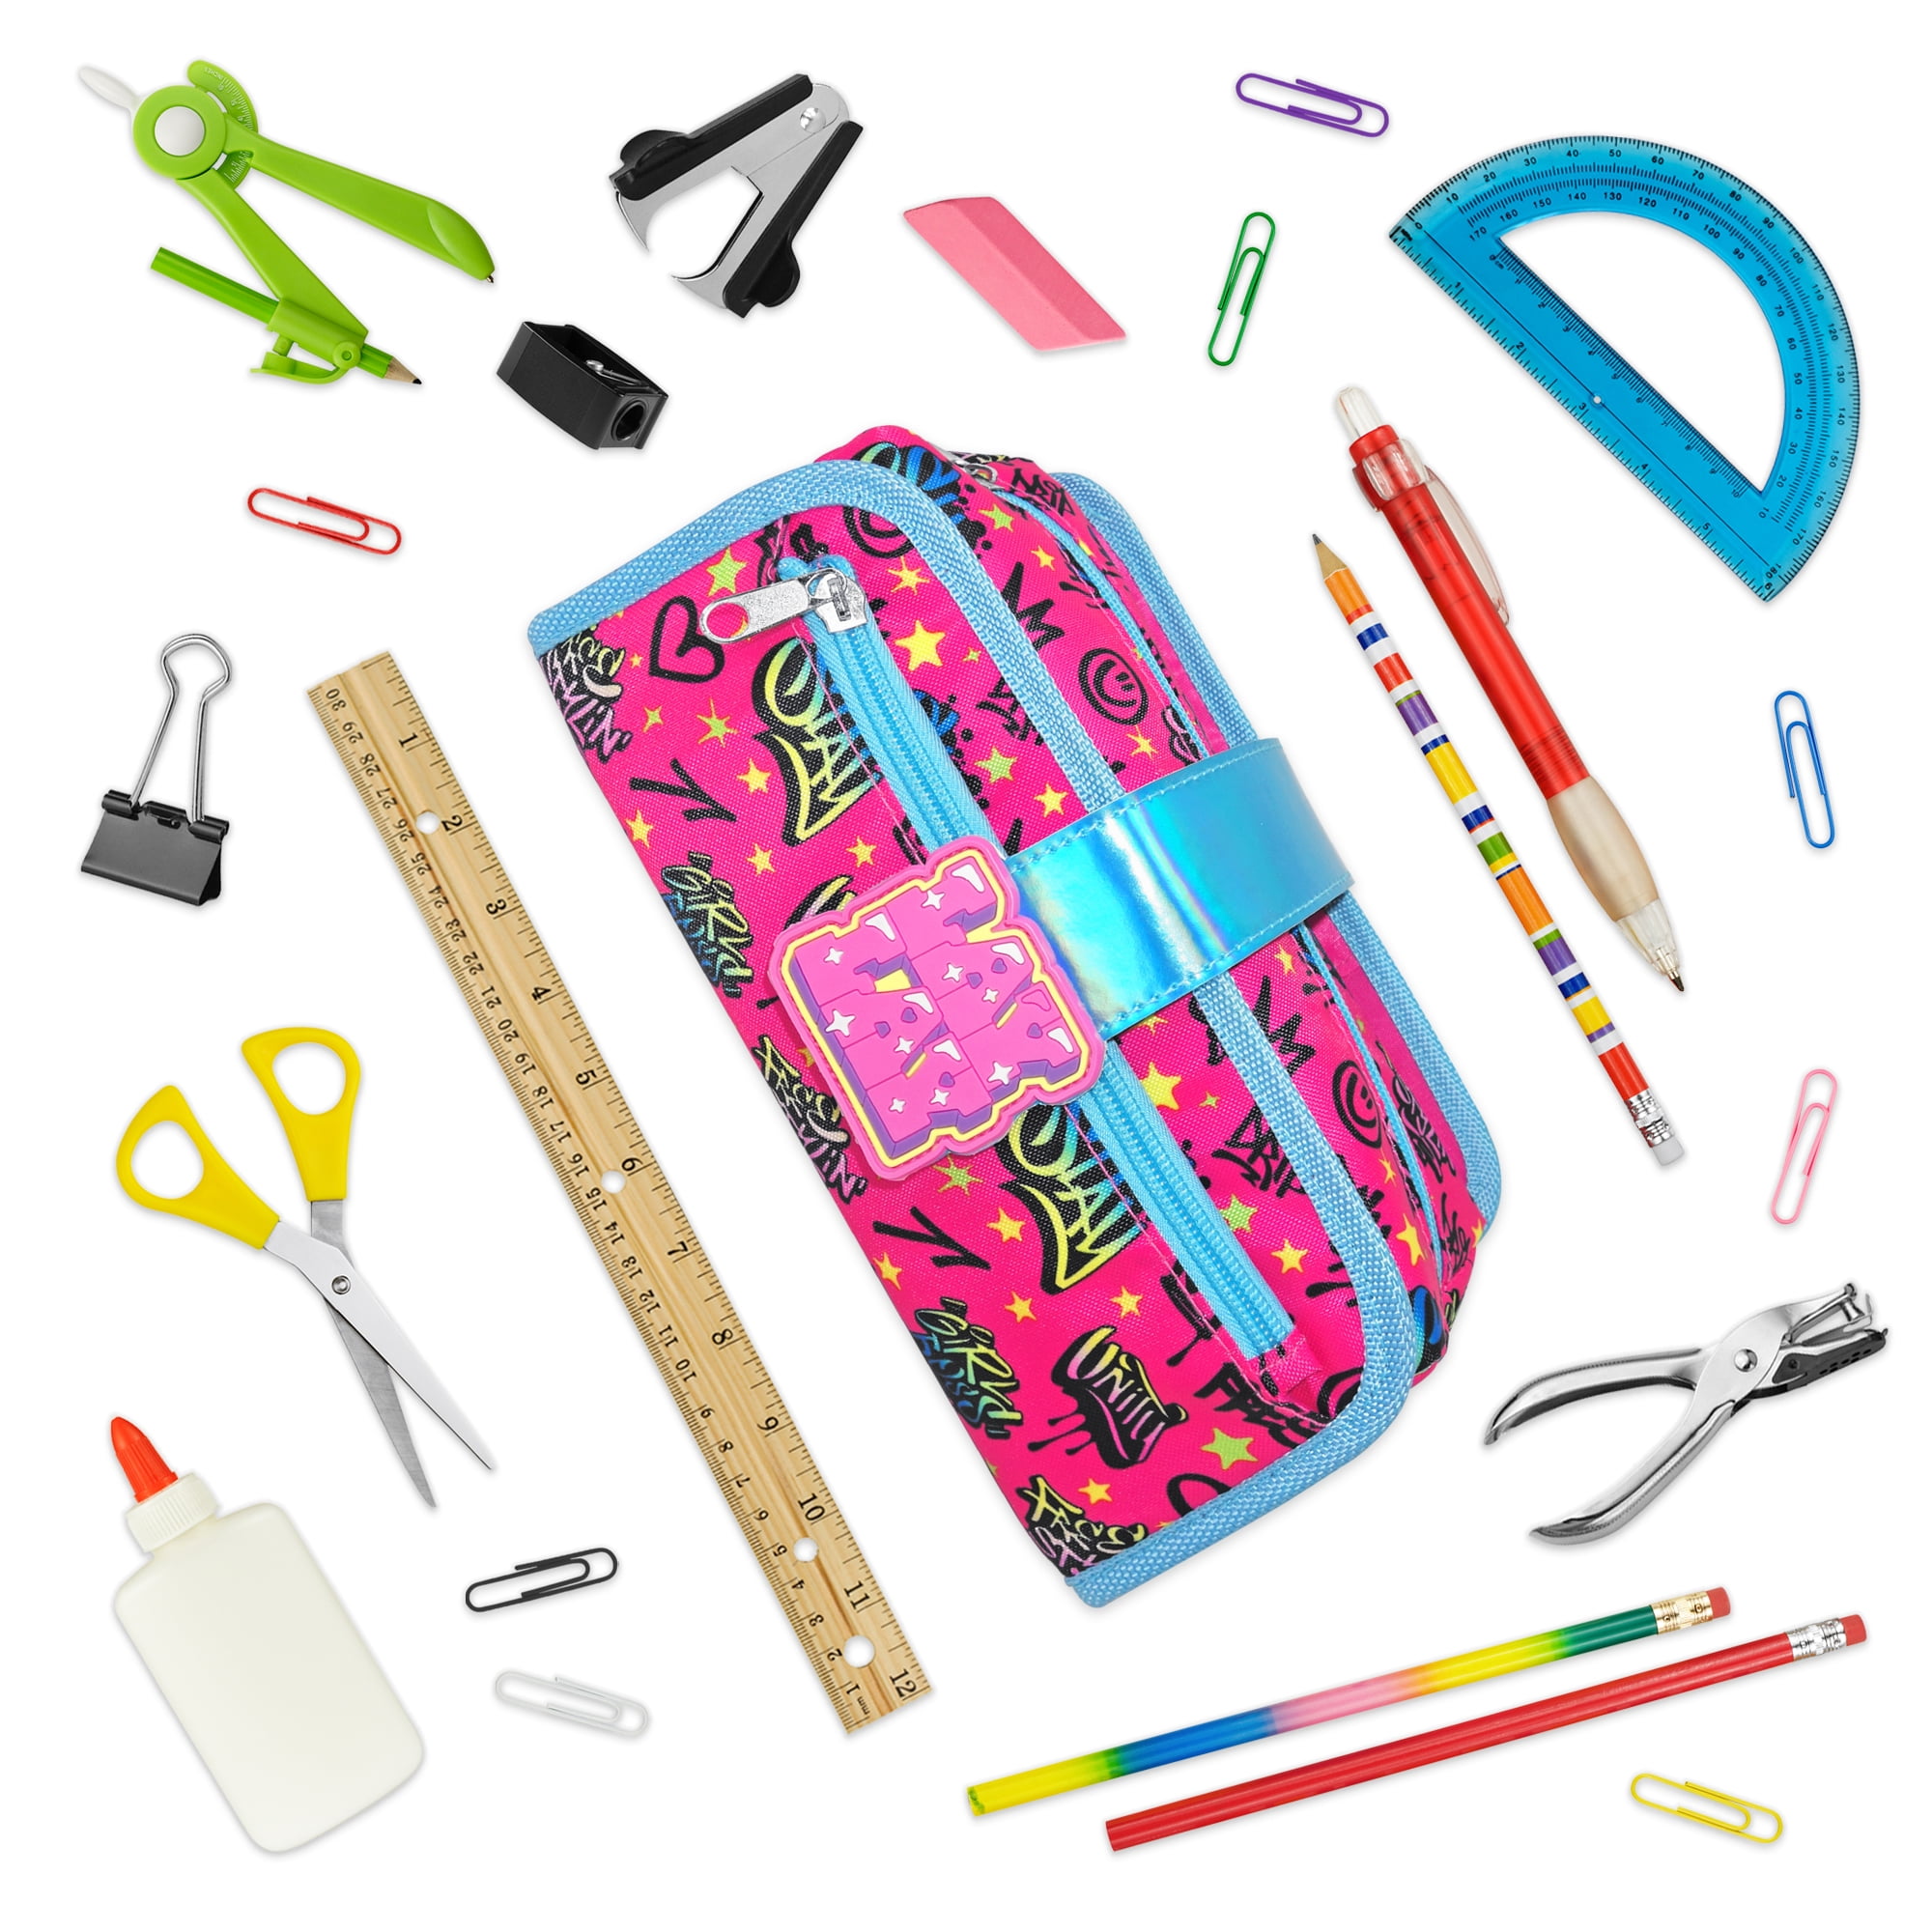 Nickelodeon Lay Lay Utility Pencil Case, Multi-Color, Soft Style, 9-Inches  Length by 3.9-inches High 